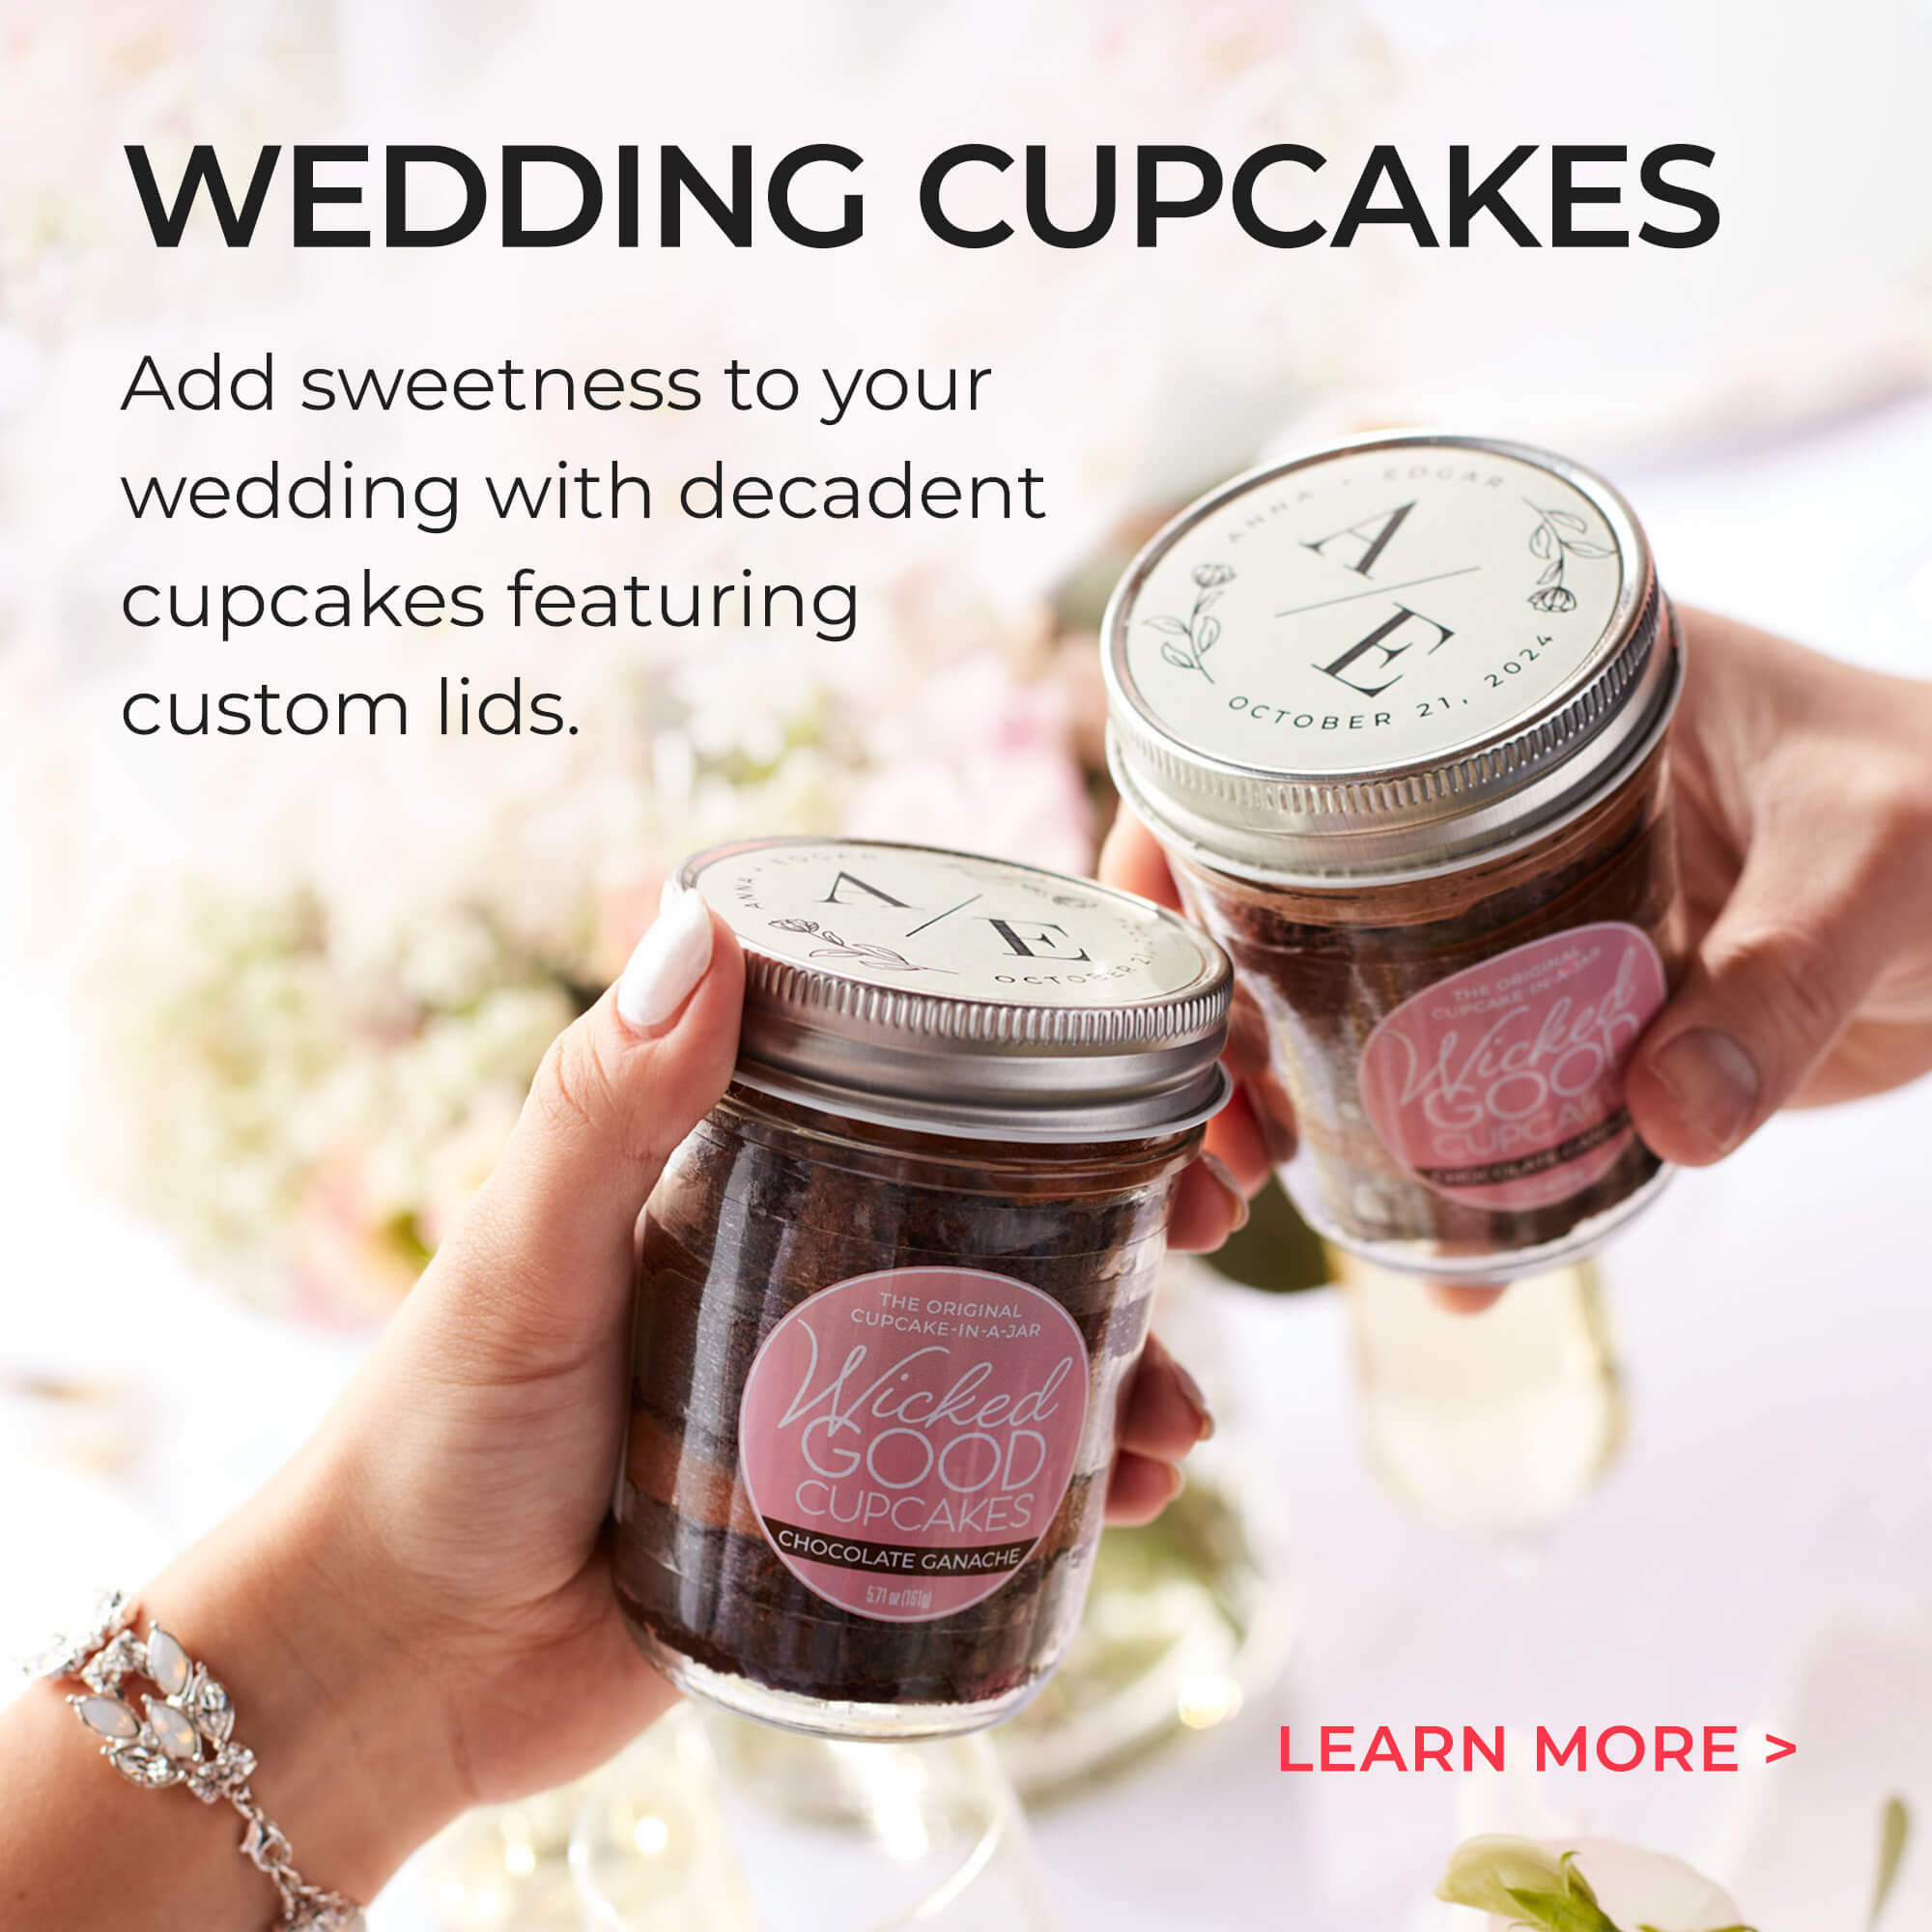 Wedding Cupcakes. Add sweetness to your wedding with decadent cupcakes featuring custom lids.